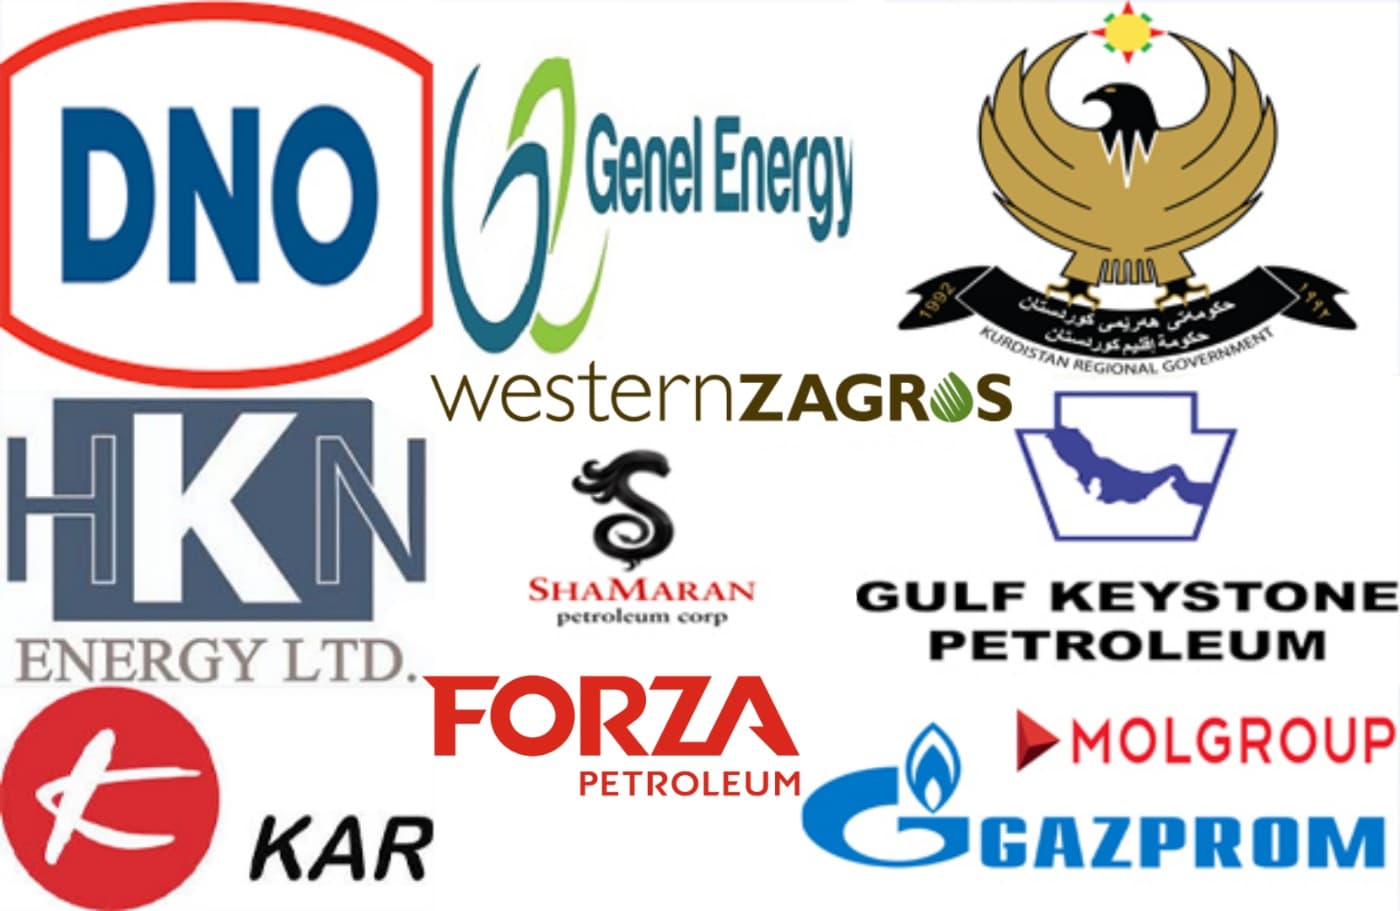 KRG IOC oil and gas